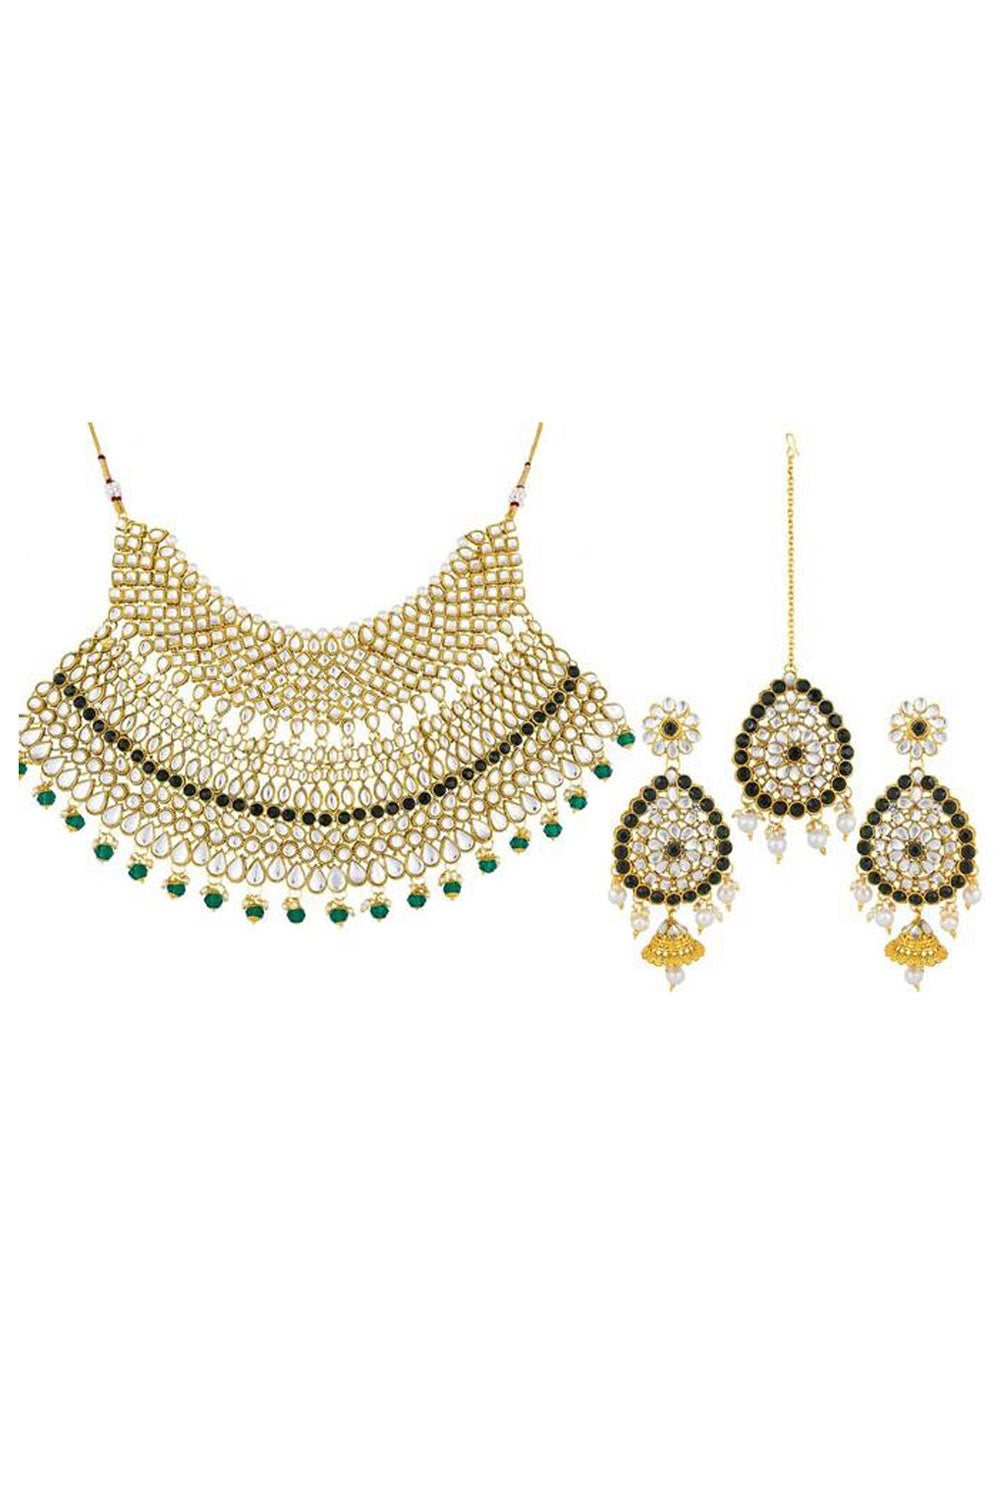 Buy Women's Alloy Necklace Set in White and Black Online